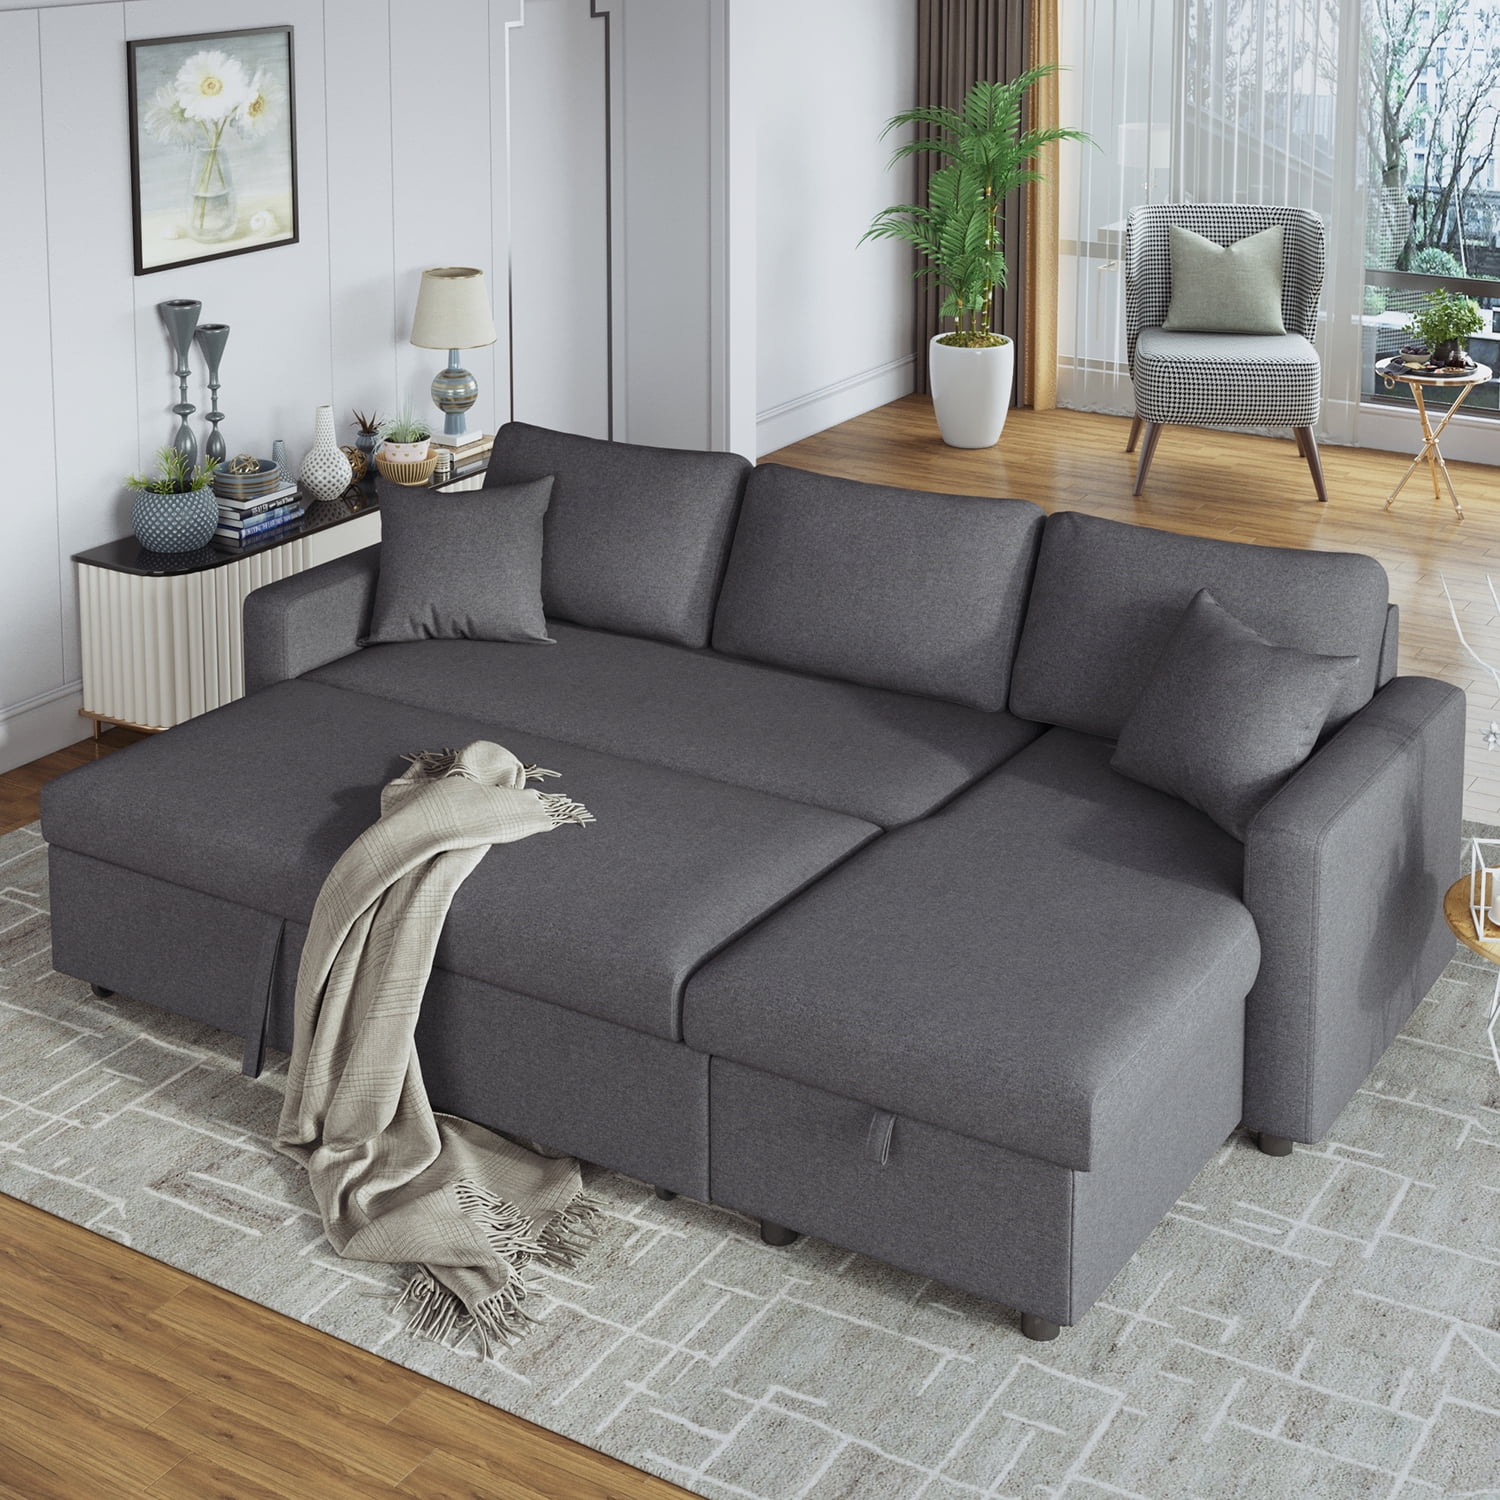 Asunflower Sectional Sofa Sleeper Couch Living Room Pull Out